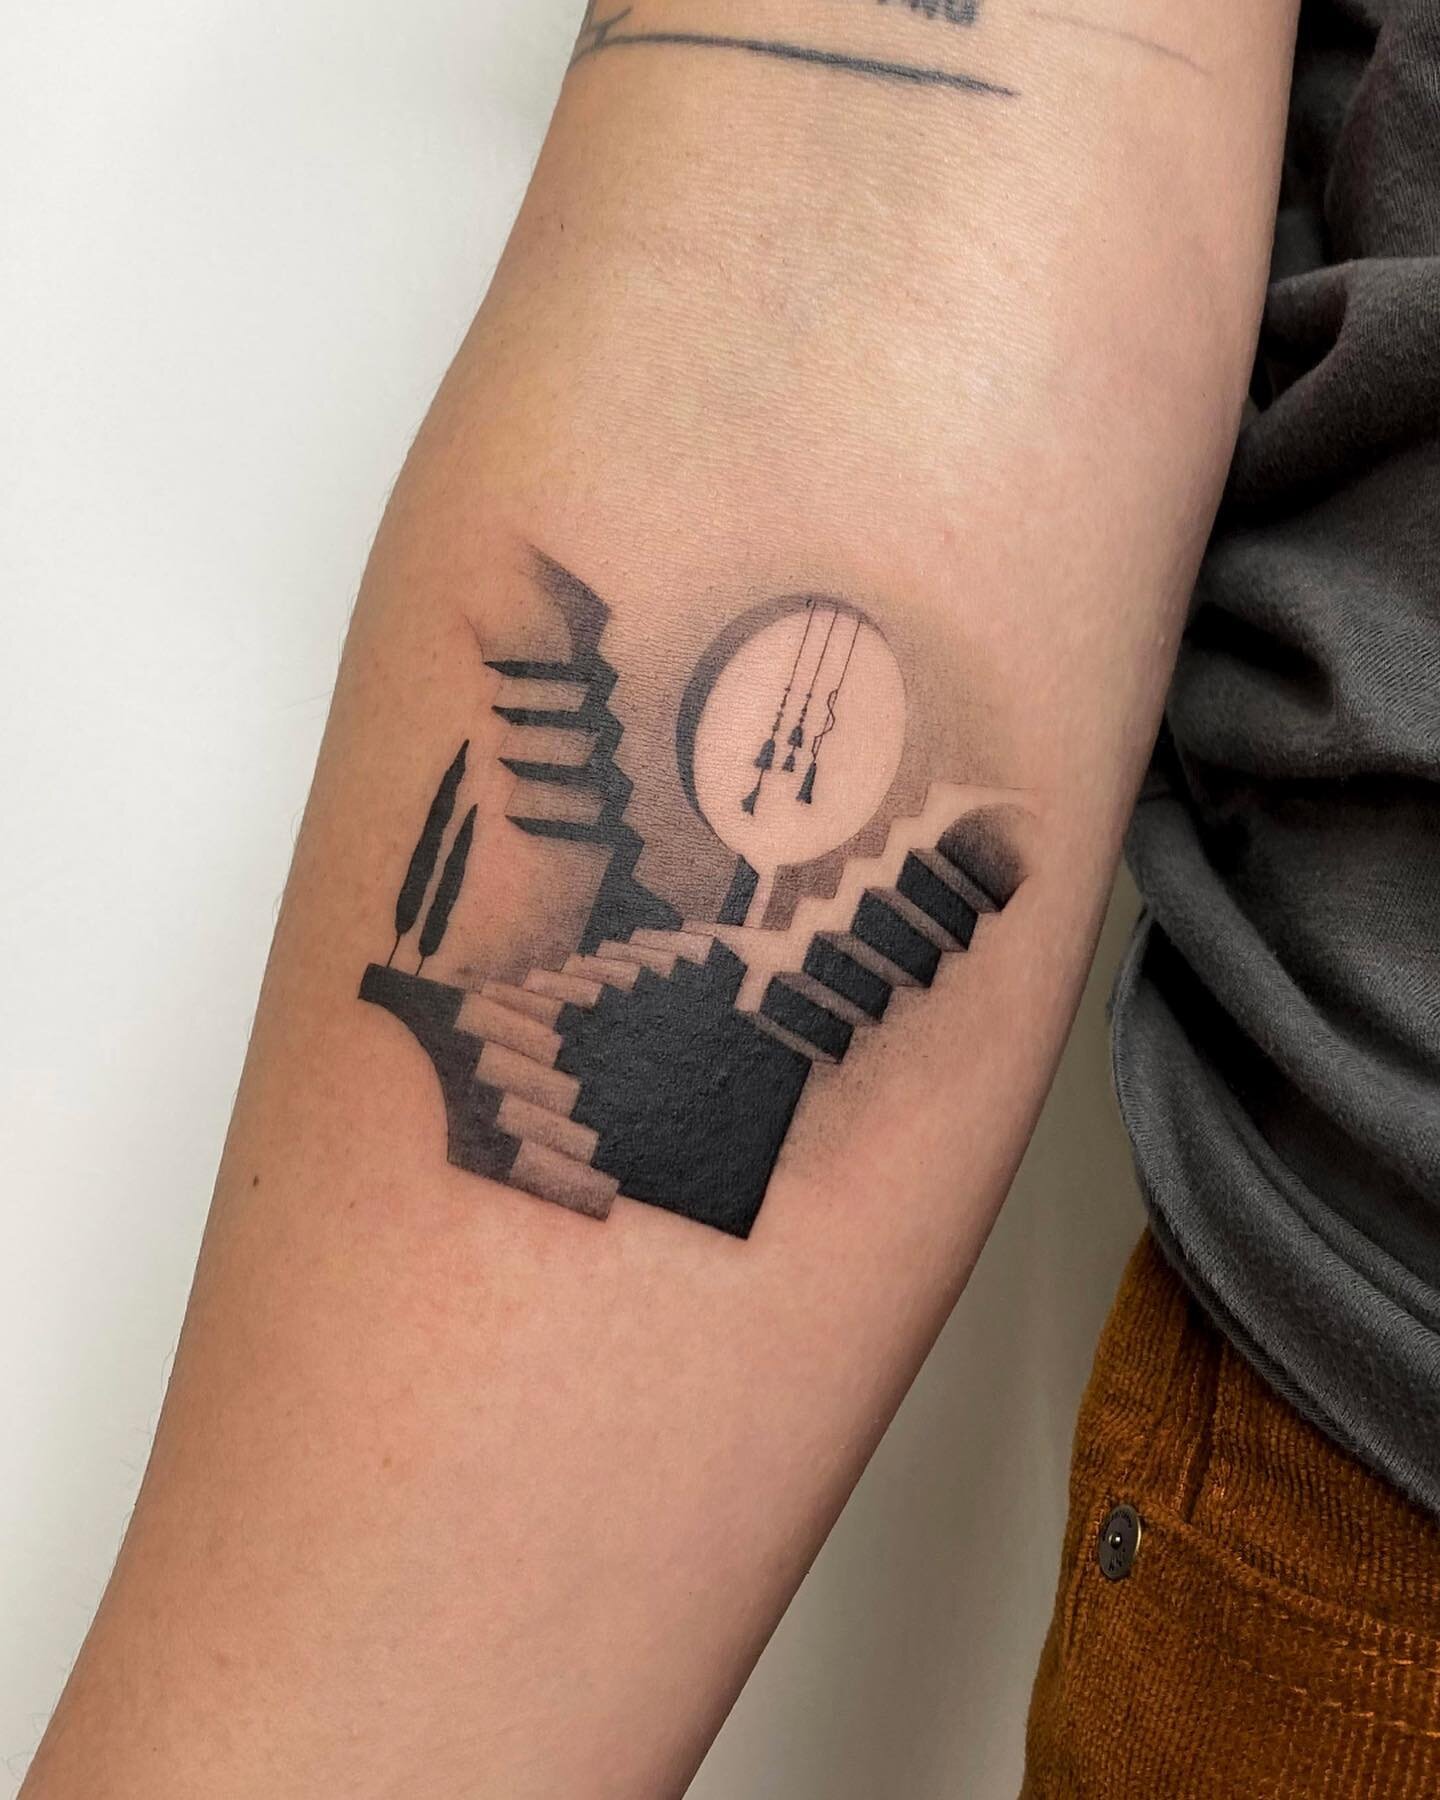 Swipe to see the inspiration behind these staircase pieces ➤➤➤
.
Thank you Elysam and Jing for picking this flash! 
.
.
.
#mcescher #eschertattoo #impossibleillusion #arcosanti #paolosoleri #arcology #architecturetattoo #archaeologytattoo #geometrict